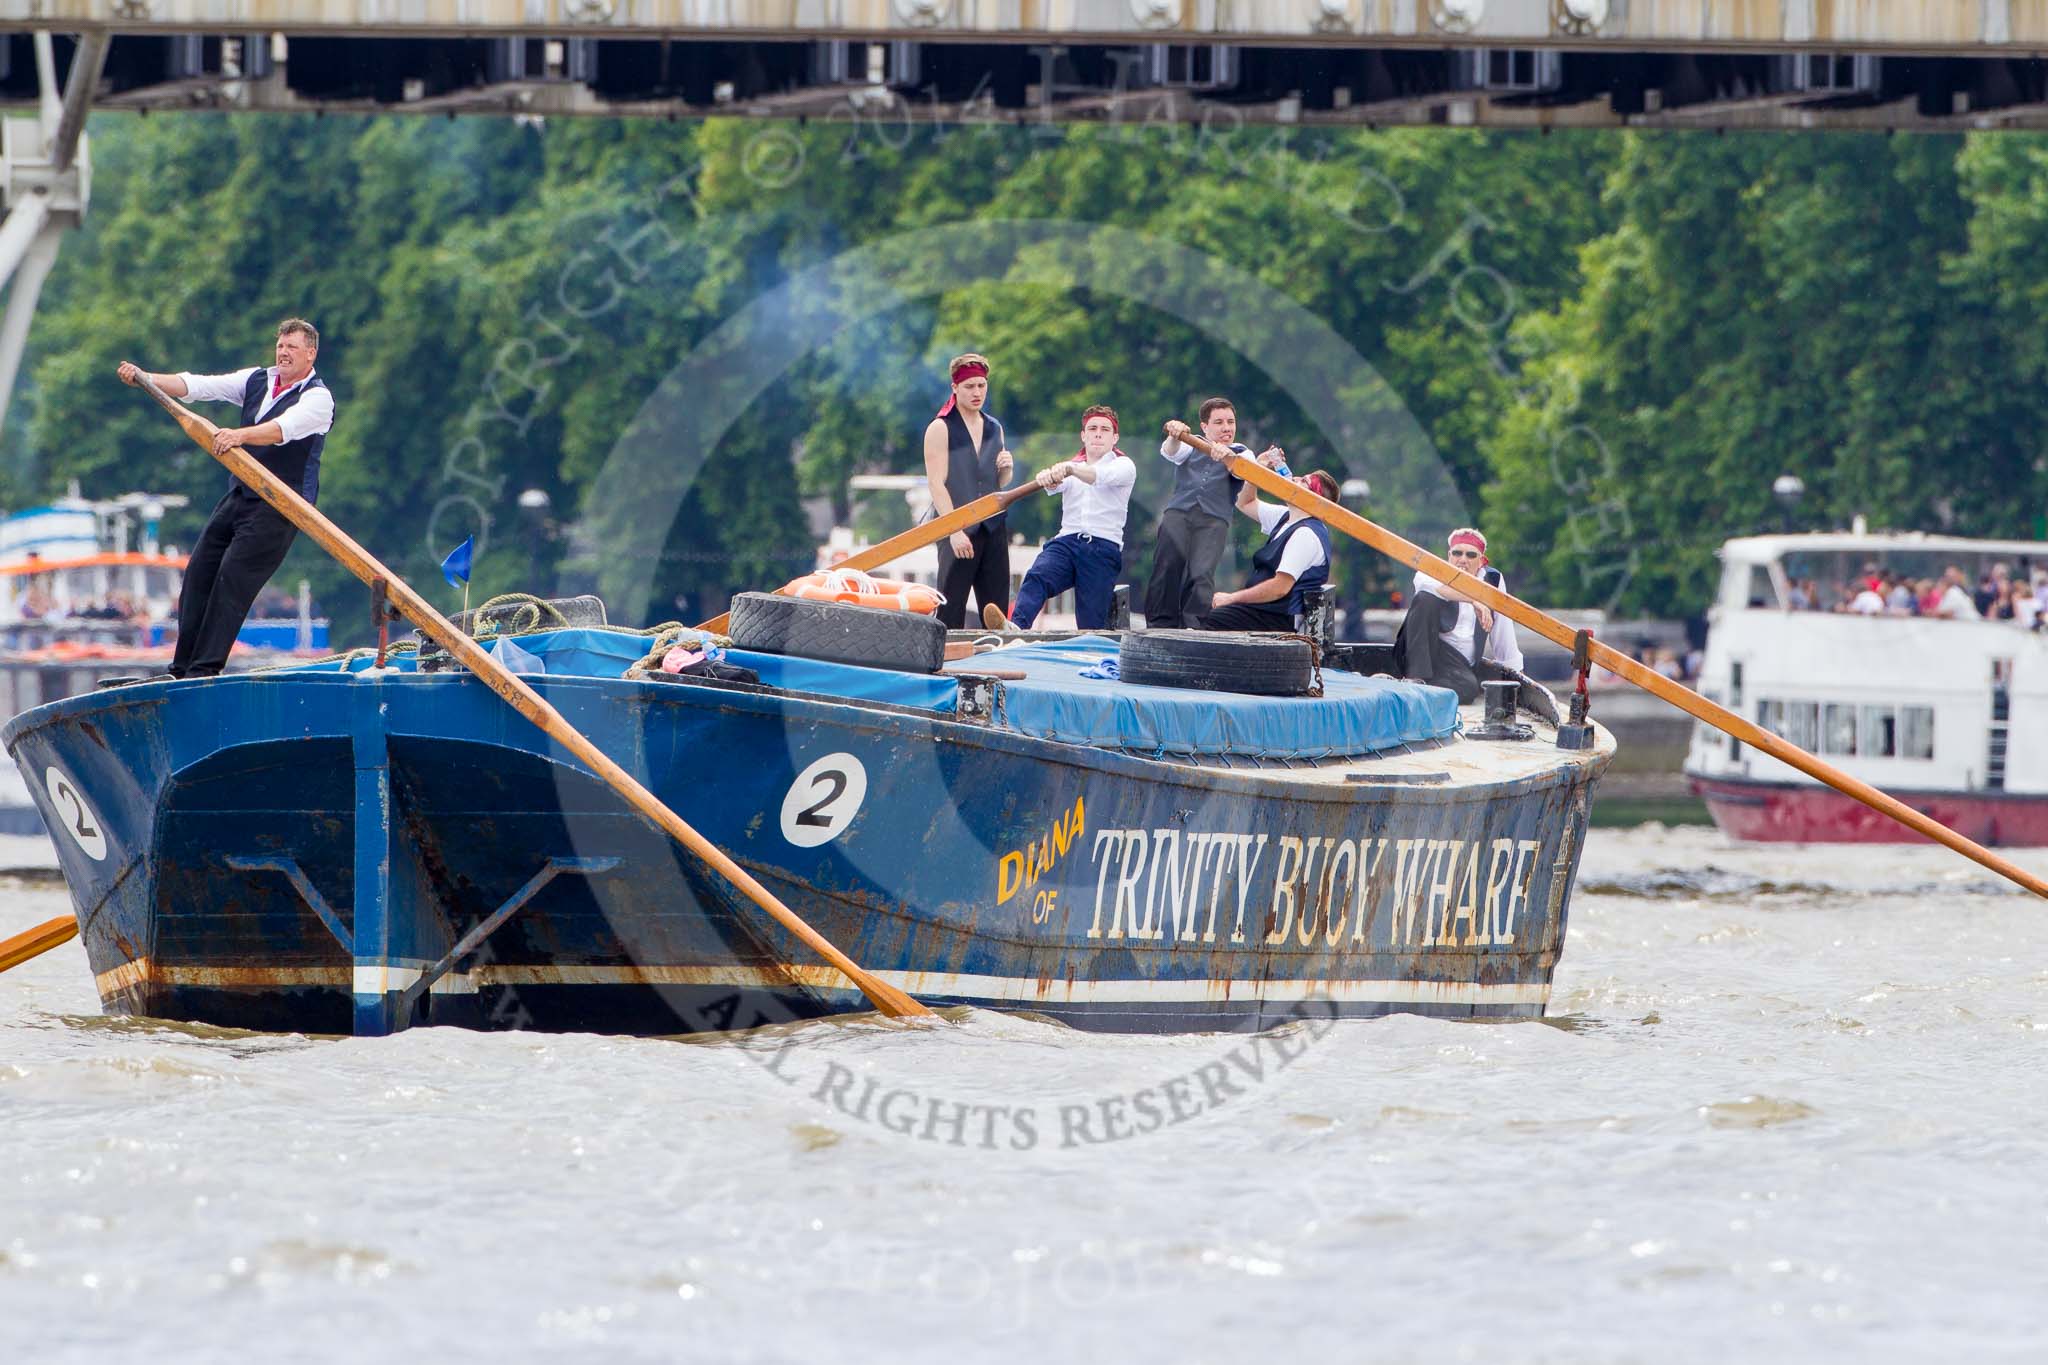 TOW River Thames Barge Driving Race 2014.
River Thames between Greenwich and Westminster,
London,

United Kingdom,
on 28 June 2014 at 13:59, image #357